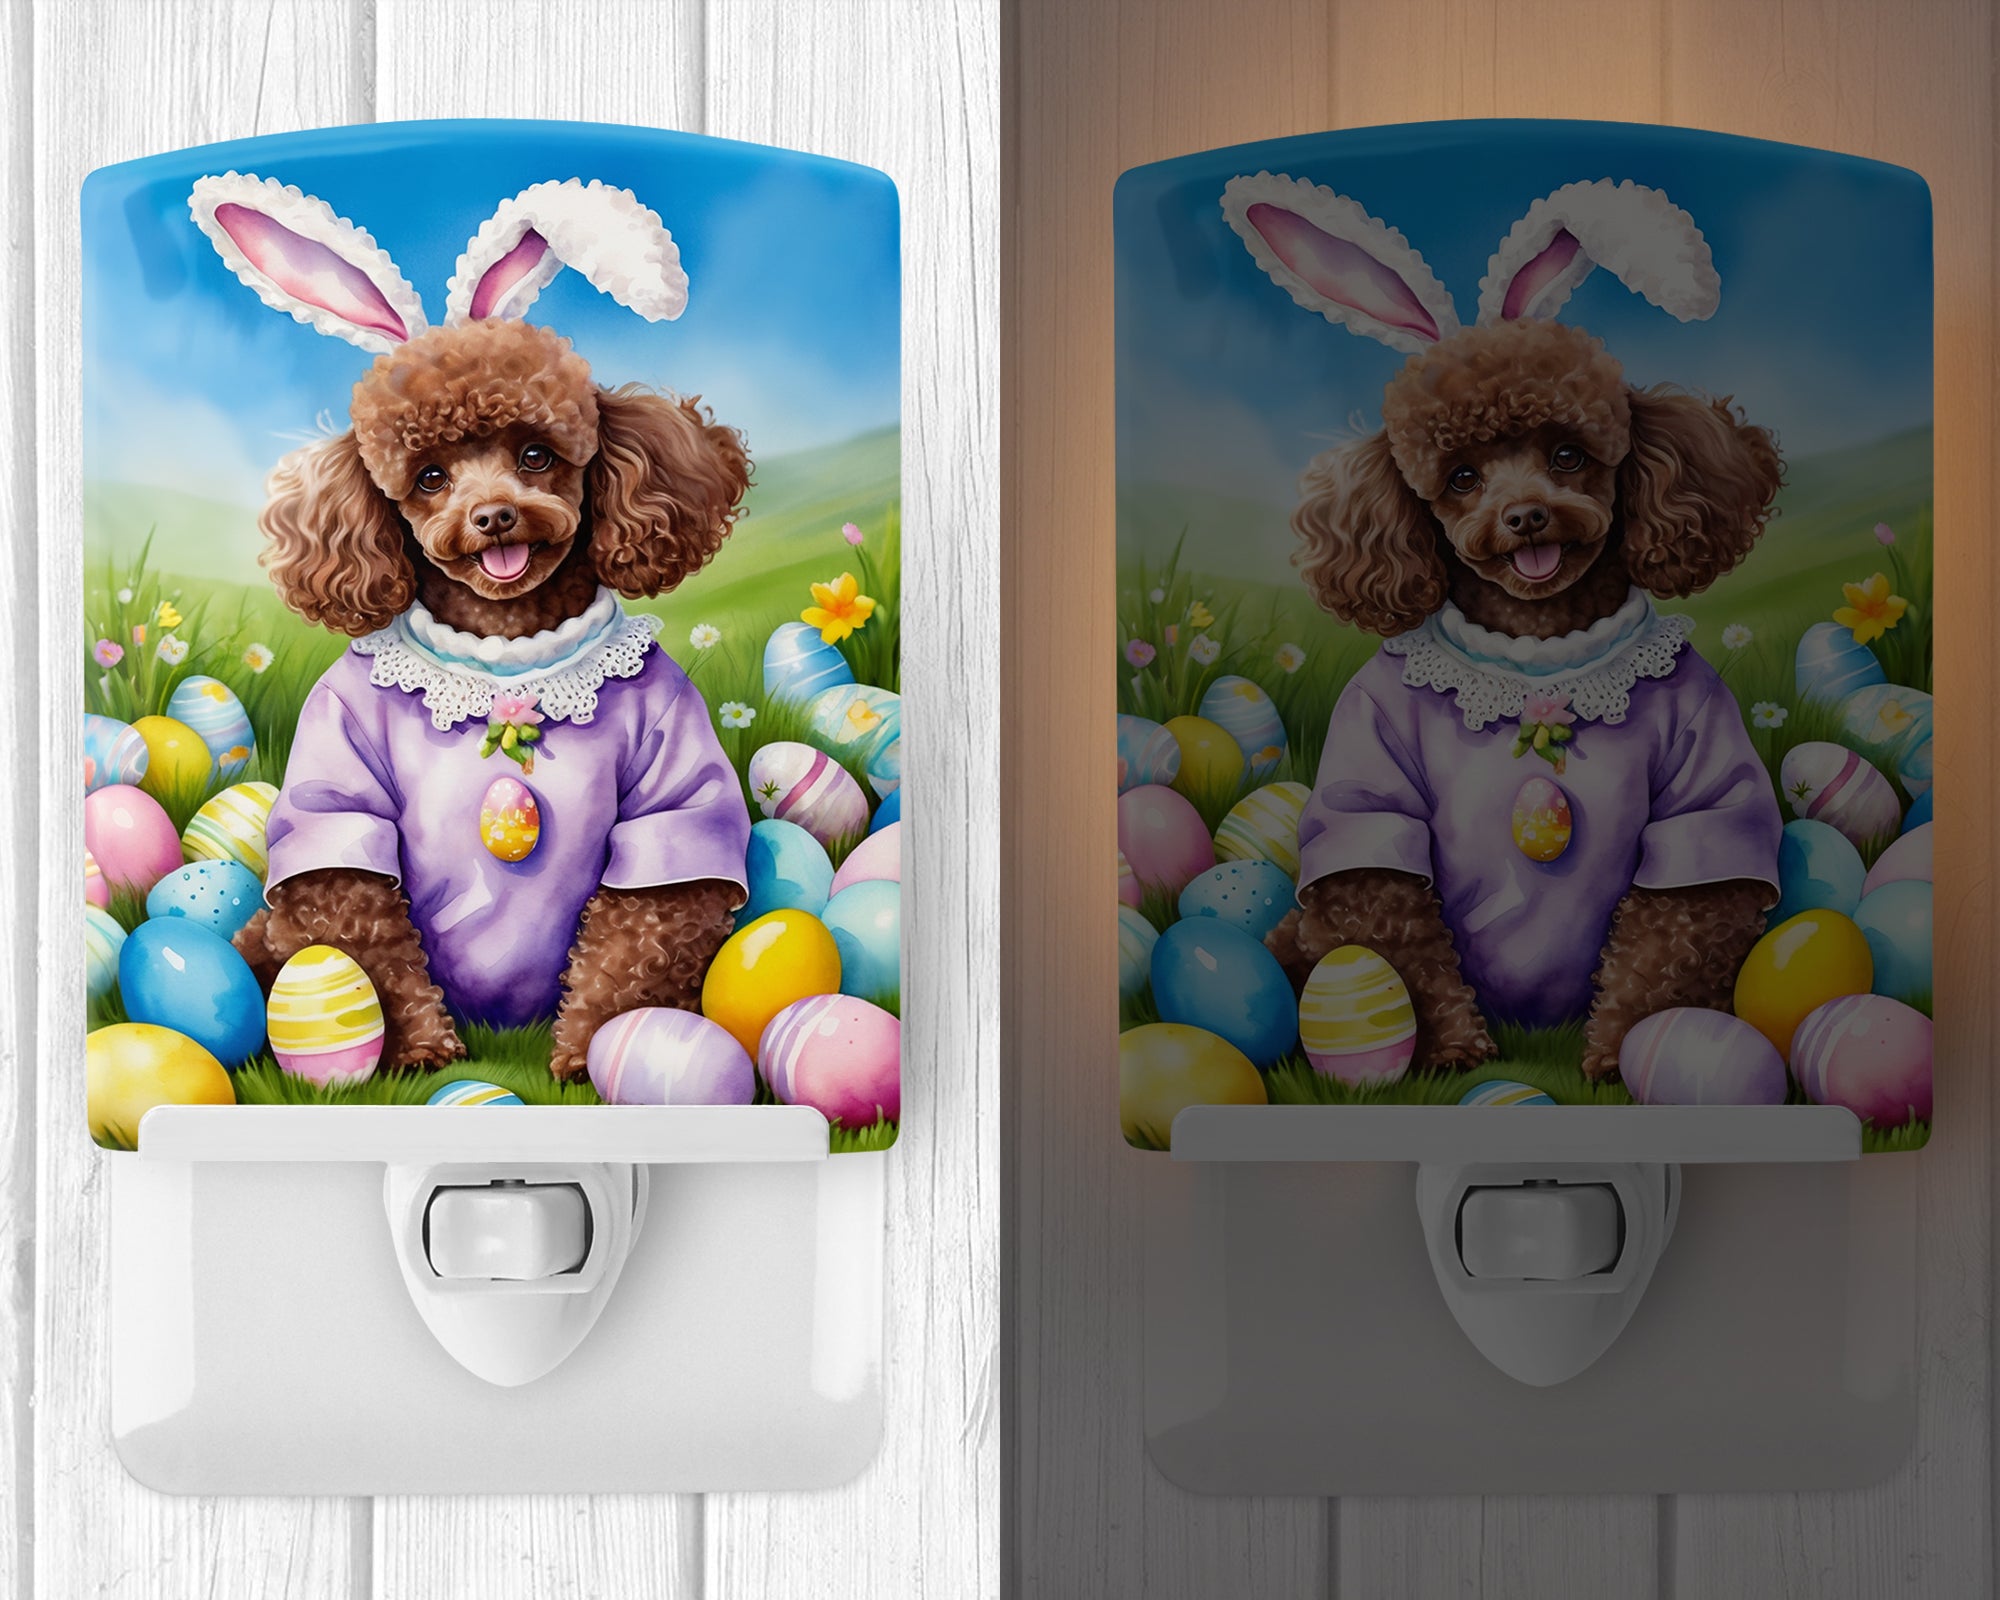 Buy this Chocolate Poodle Easter Egg Hunt Ceramic Night Light